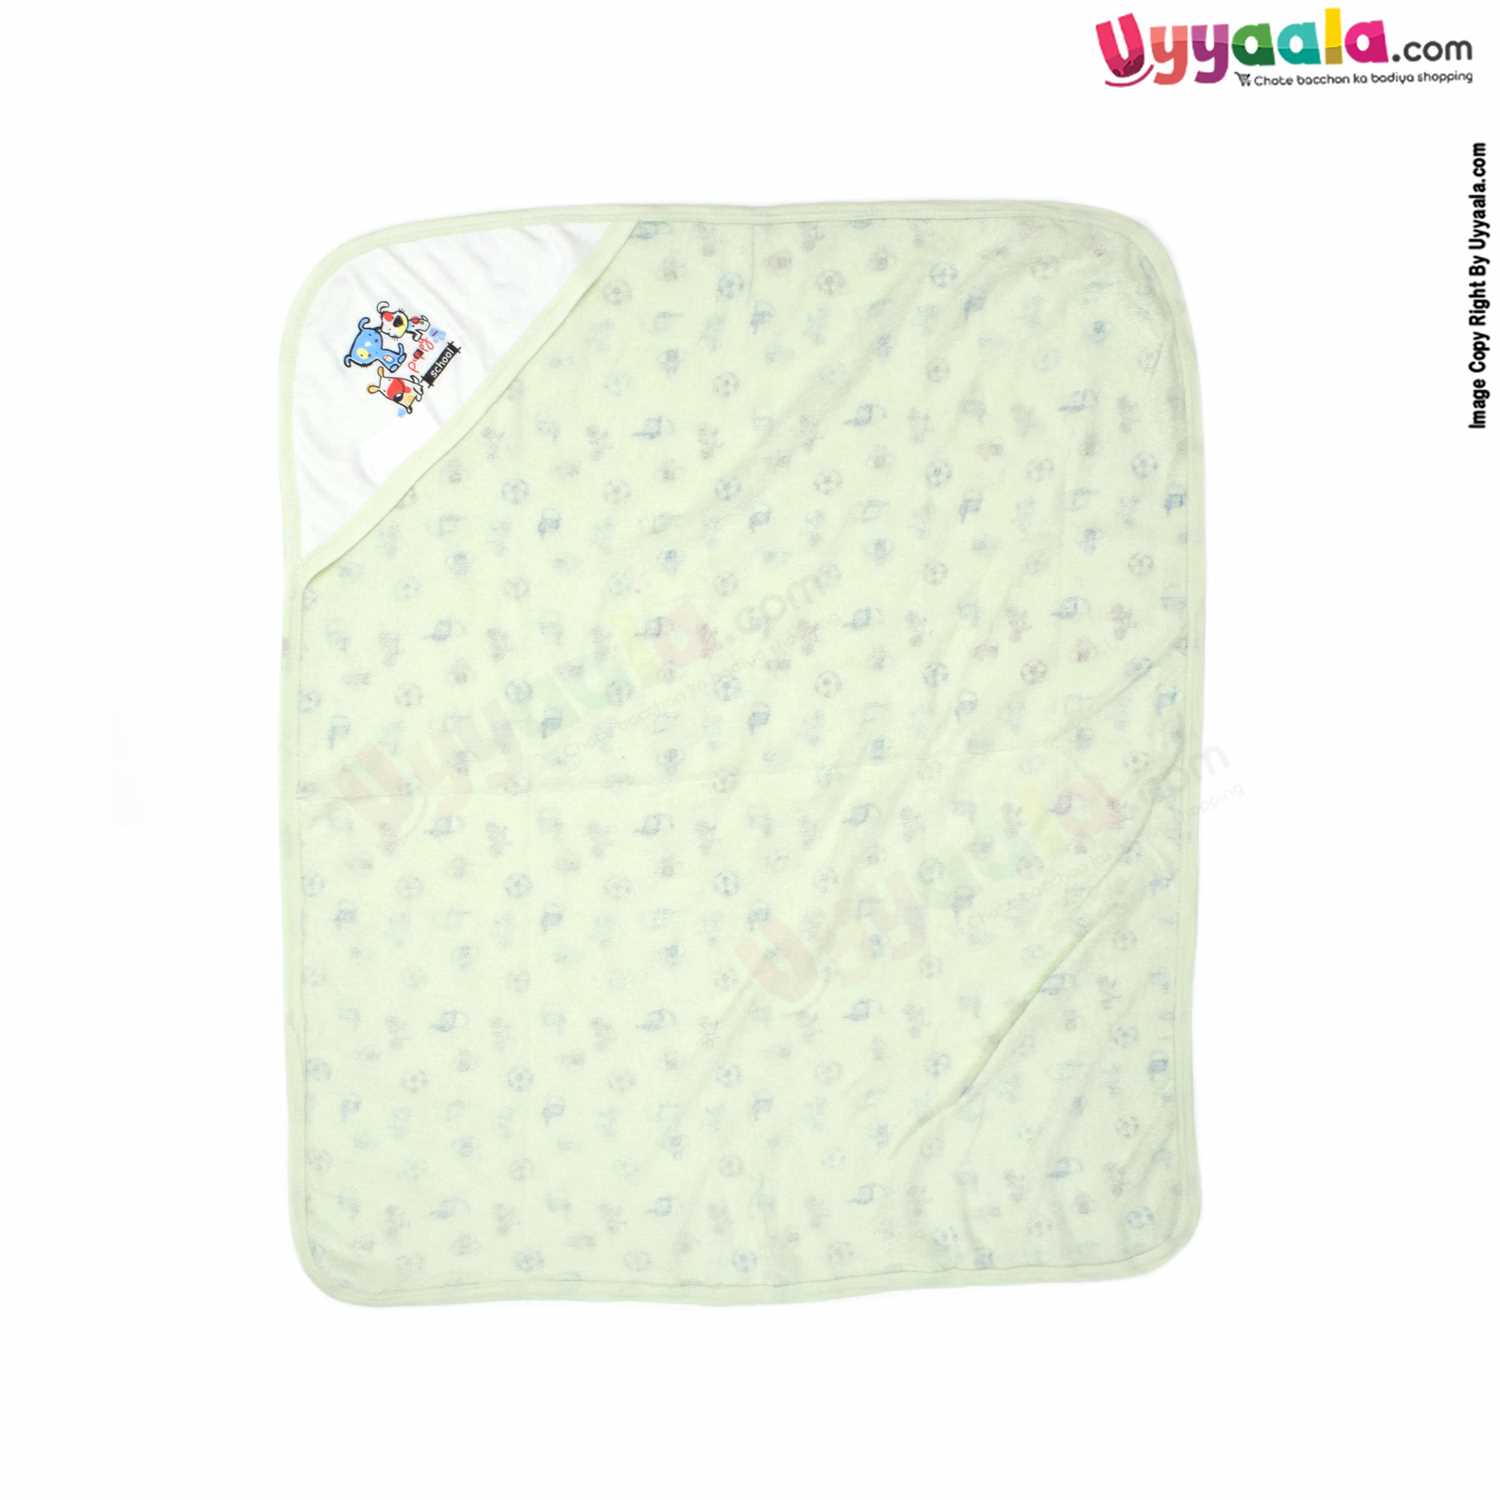 ZERO Baby Bath Soft 100% Cotton Towel with Foot Ball & Cycle Print 0+m Age, Size (84*76cm)- Light Green